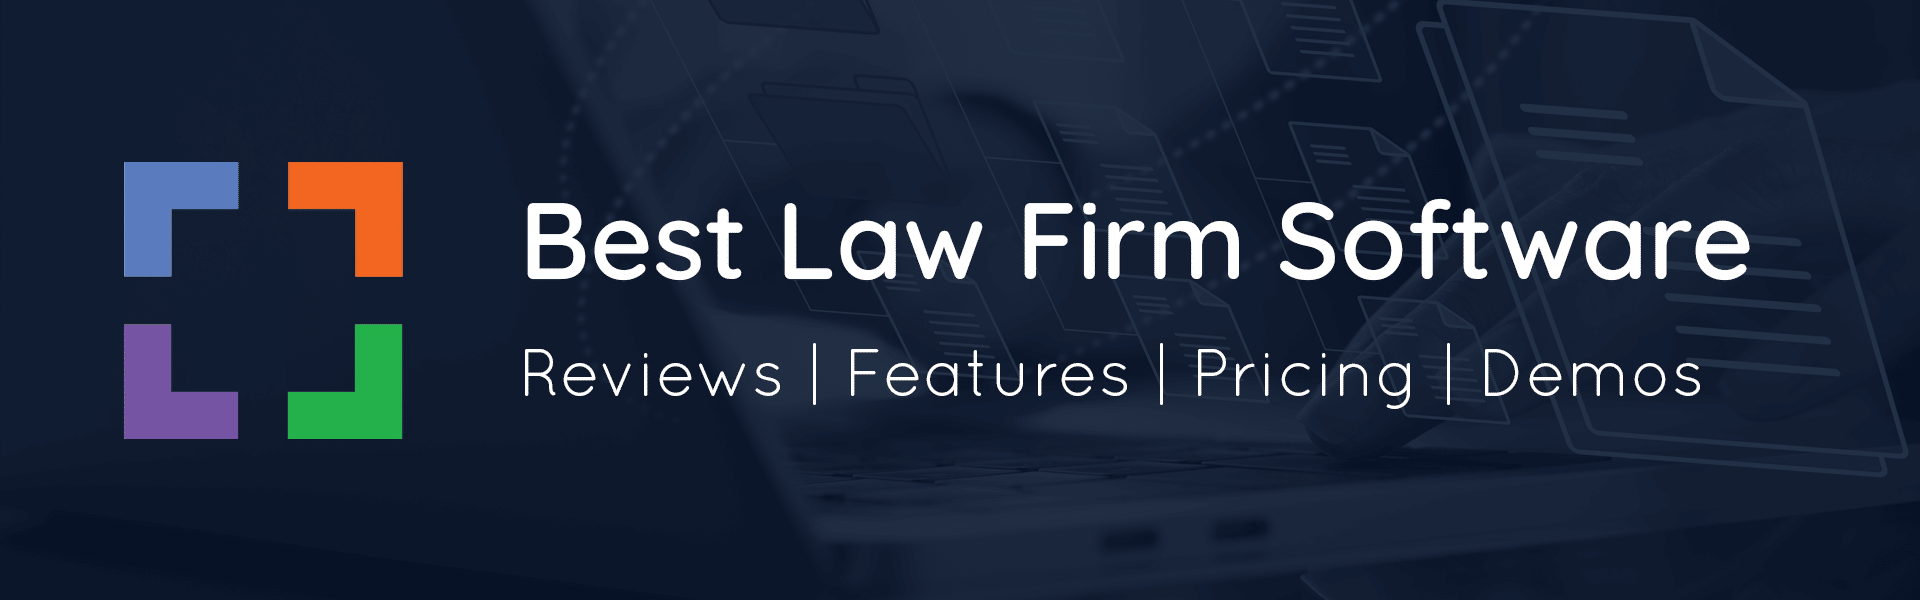 best law firm software banner